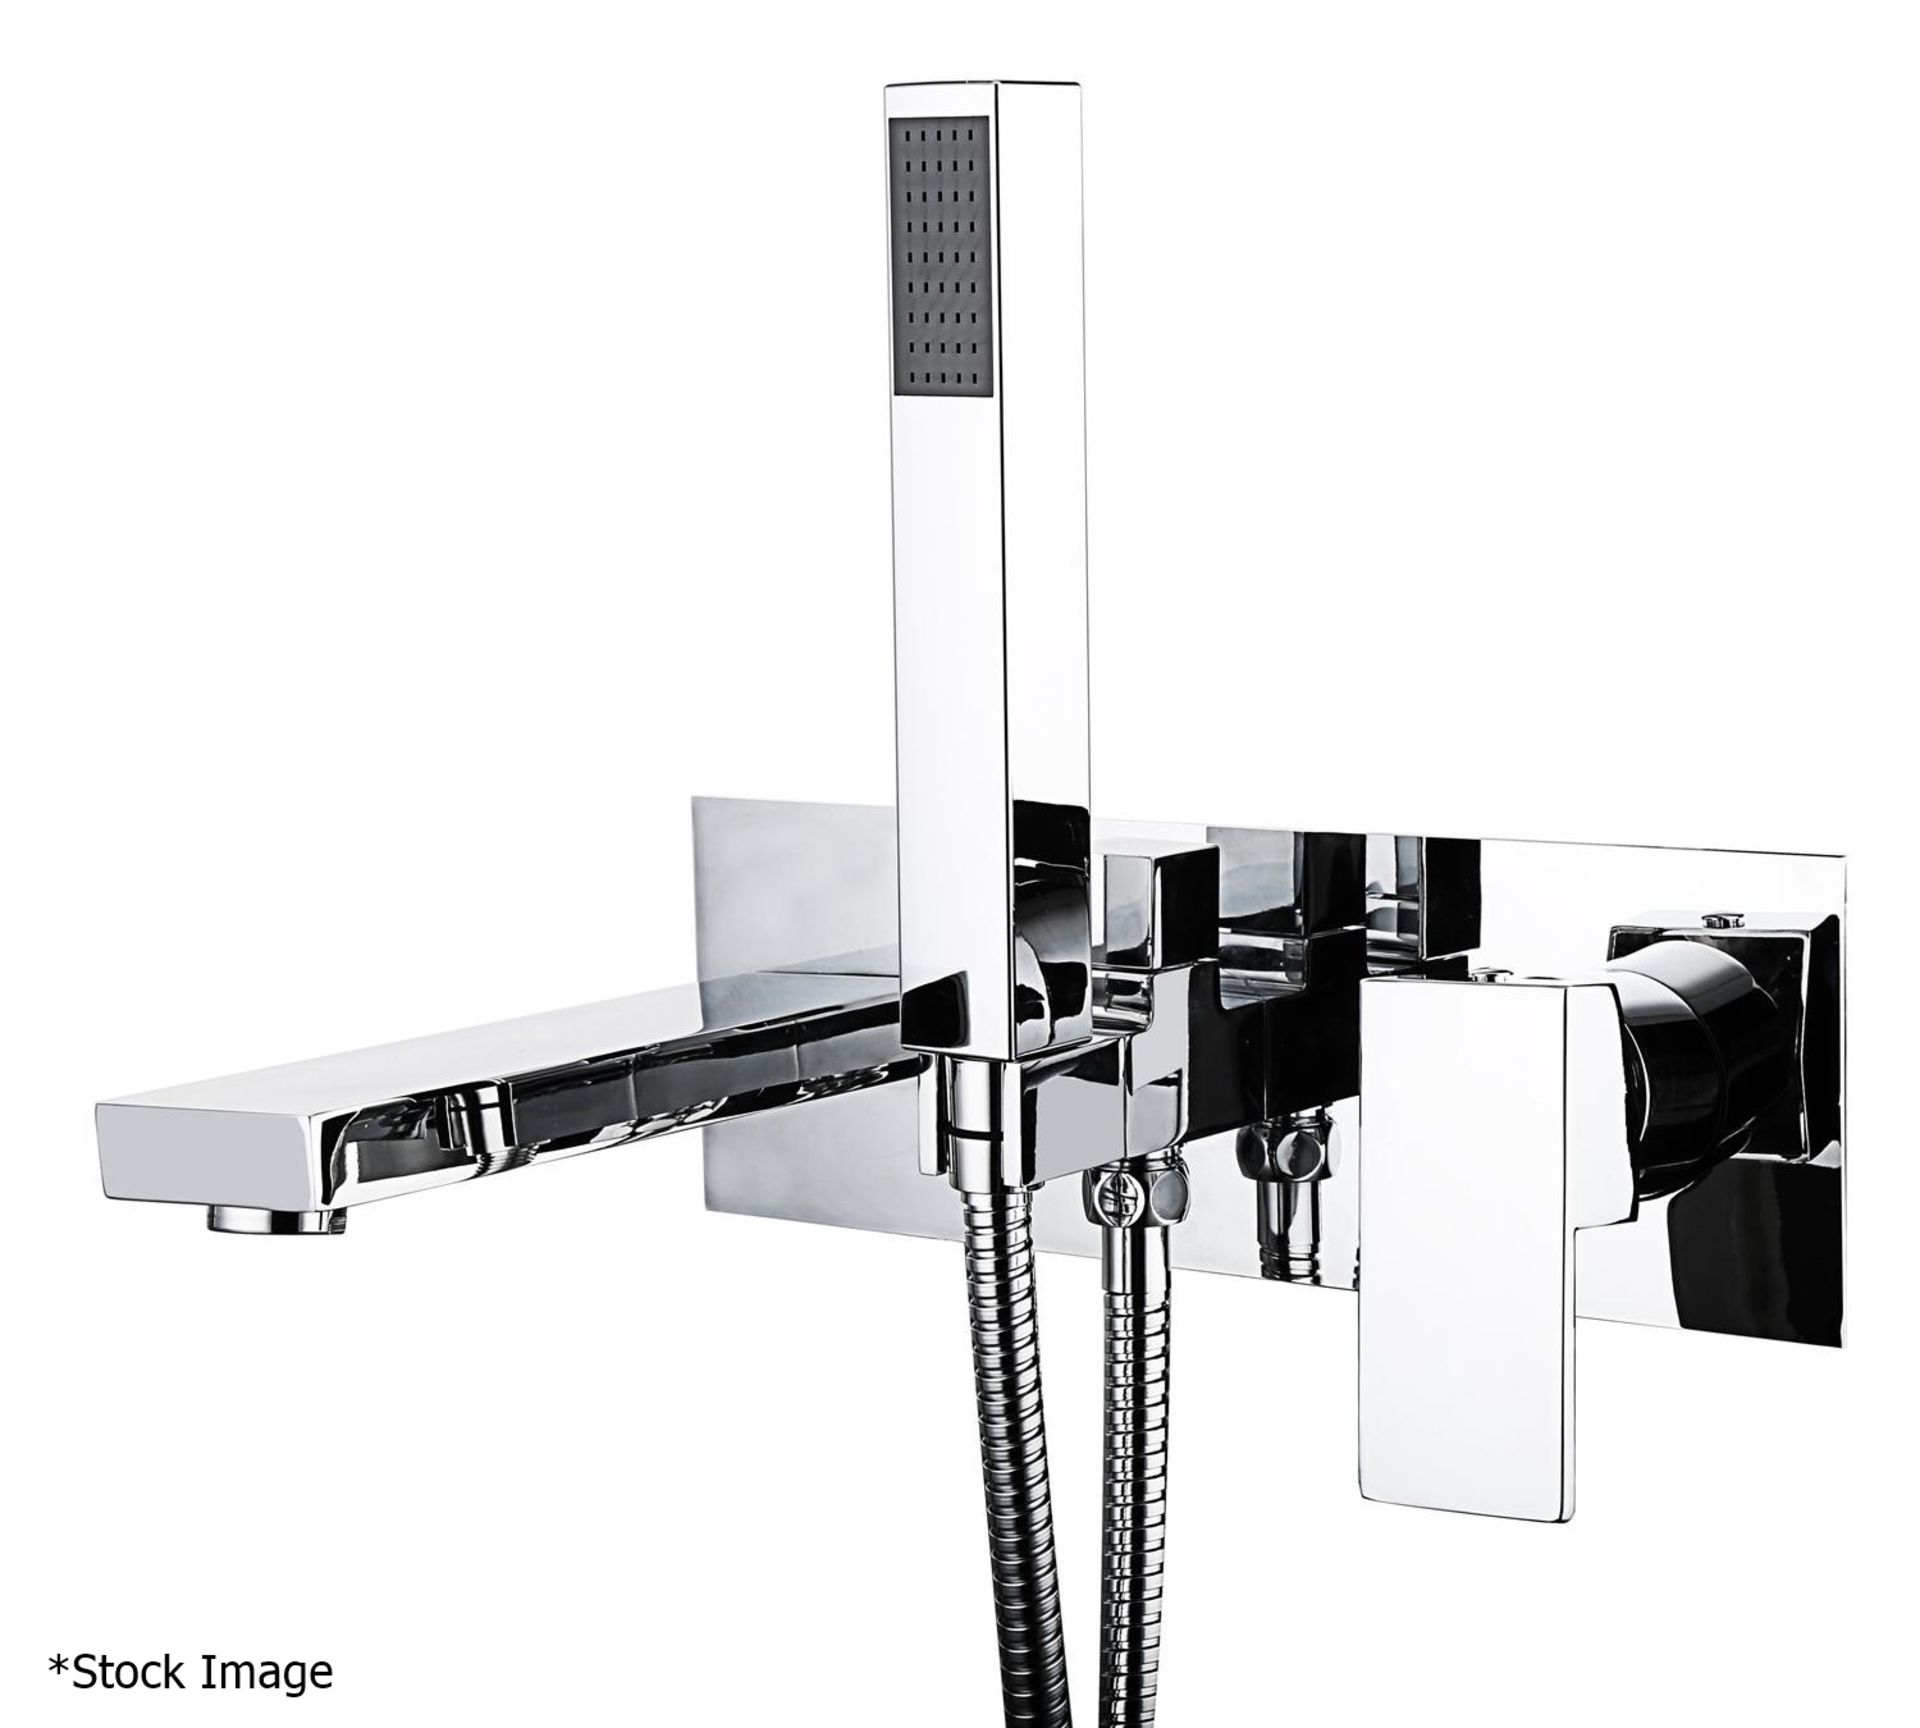 1 x Cassellie 'Form' Wall Mounted Bath Shower Mixer Tap - Ref: FRM006 - New & Boxed Stock - RRP £ - Image 3 of 3